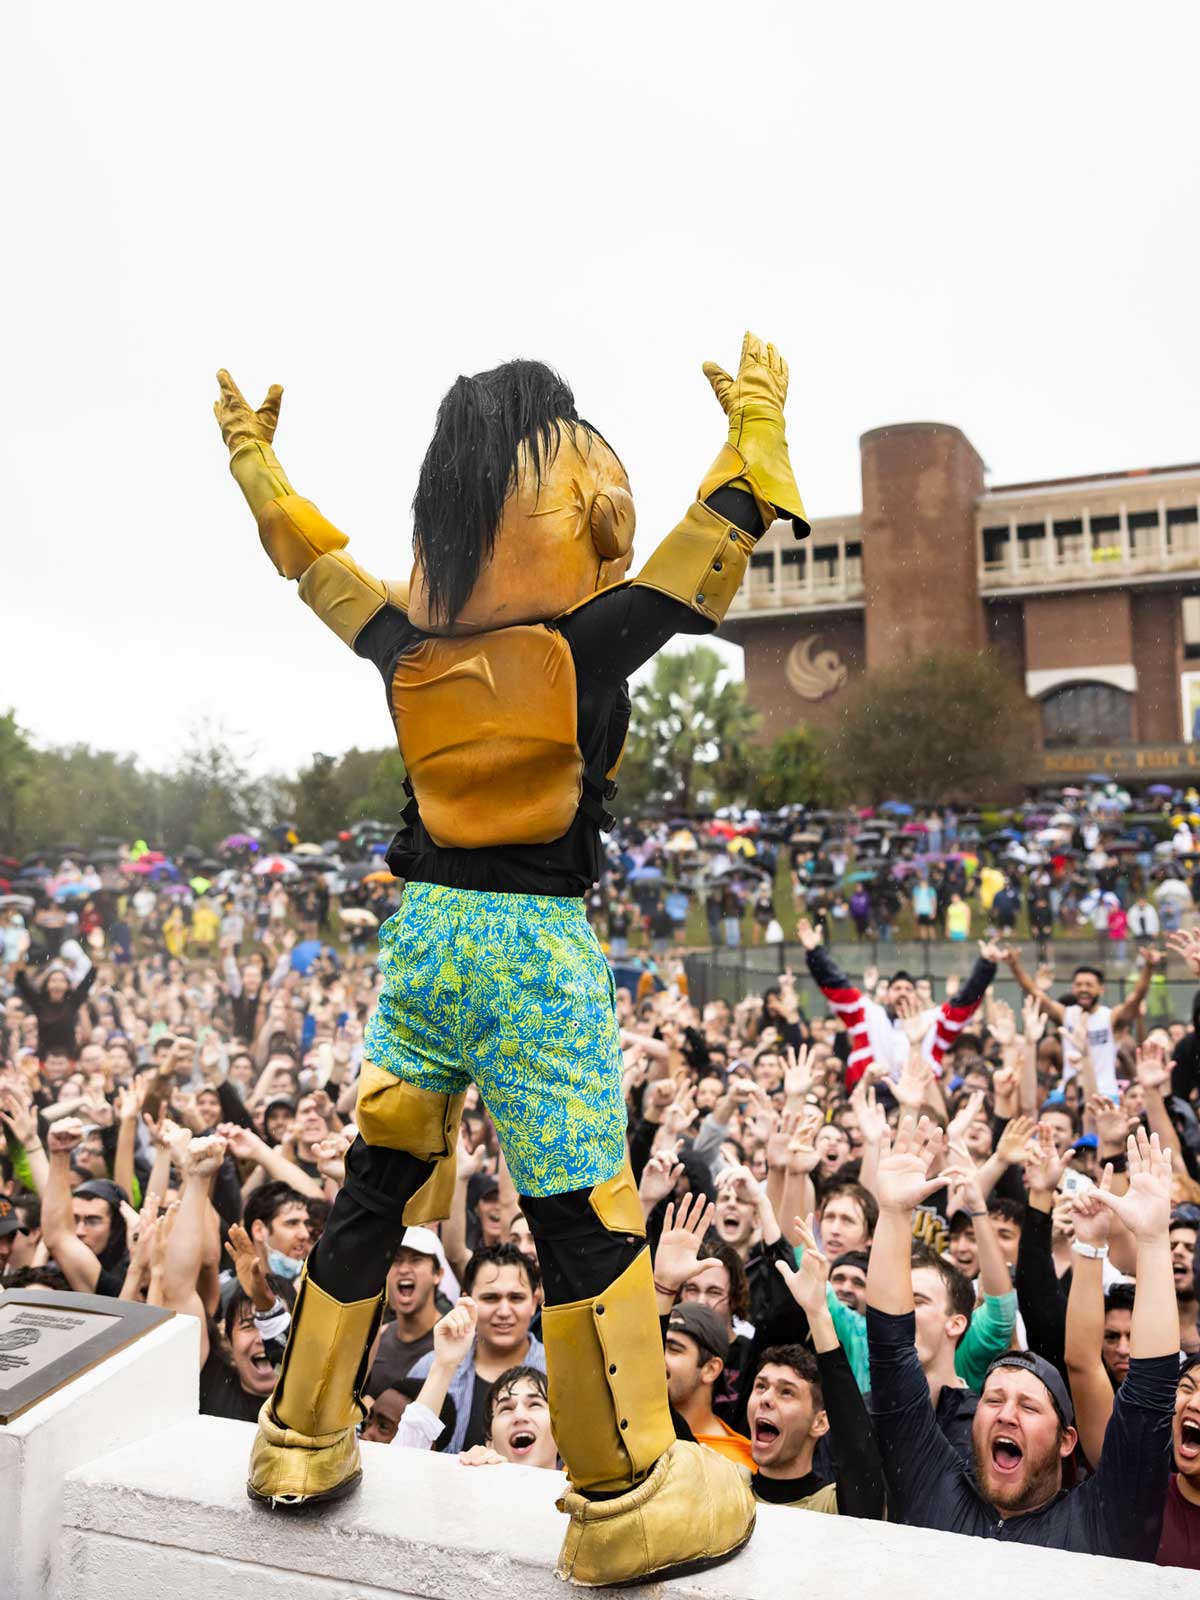 Knightro in board shorts energizes crowd after rushing the Reflecting Pond at Spirit Splash